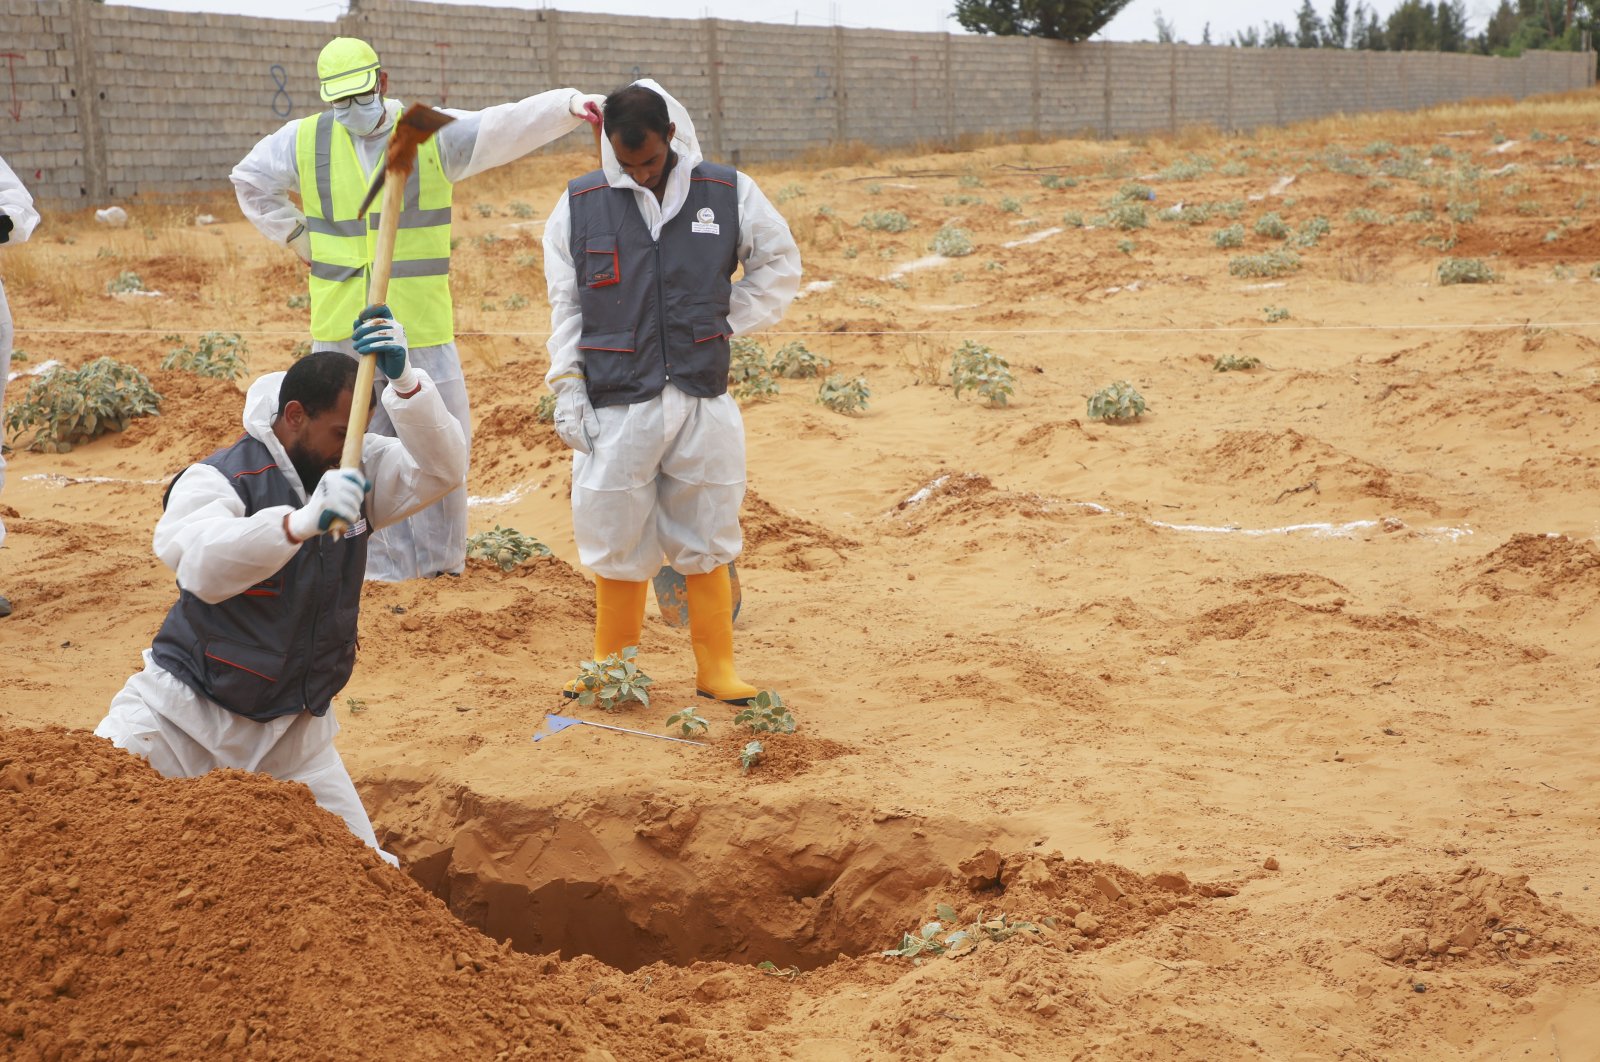 Libyan Ministry of Justice employees dig at a site of a suspected mass grave in the town of Tarhuna, Libya, June 23, 2020 (AP Photo)